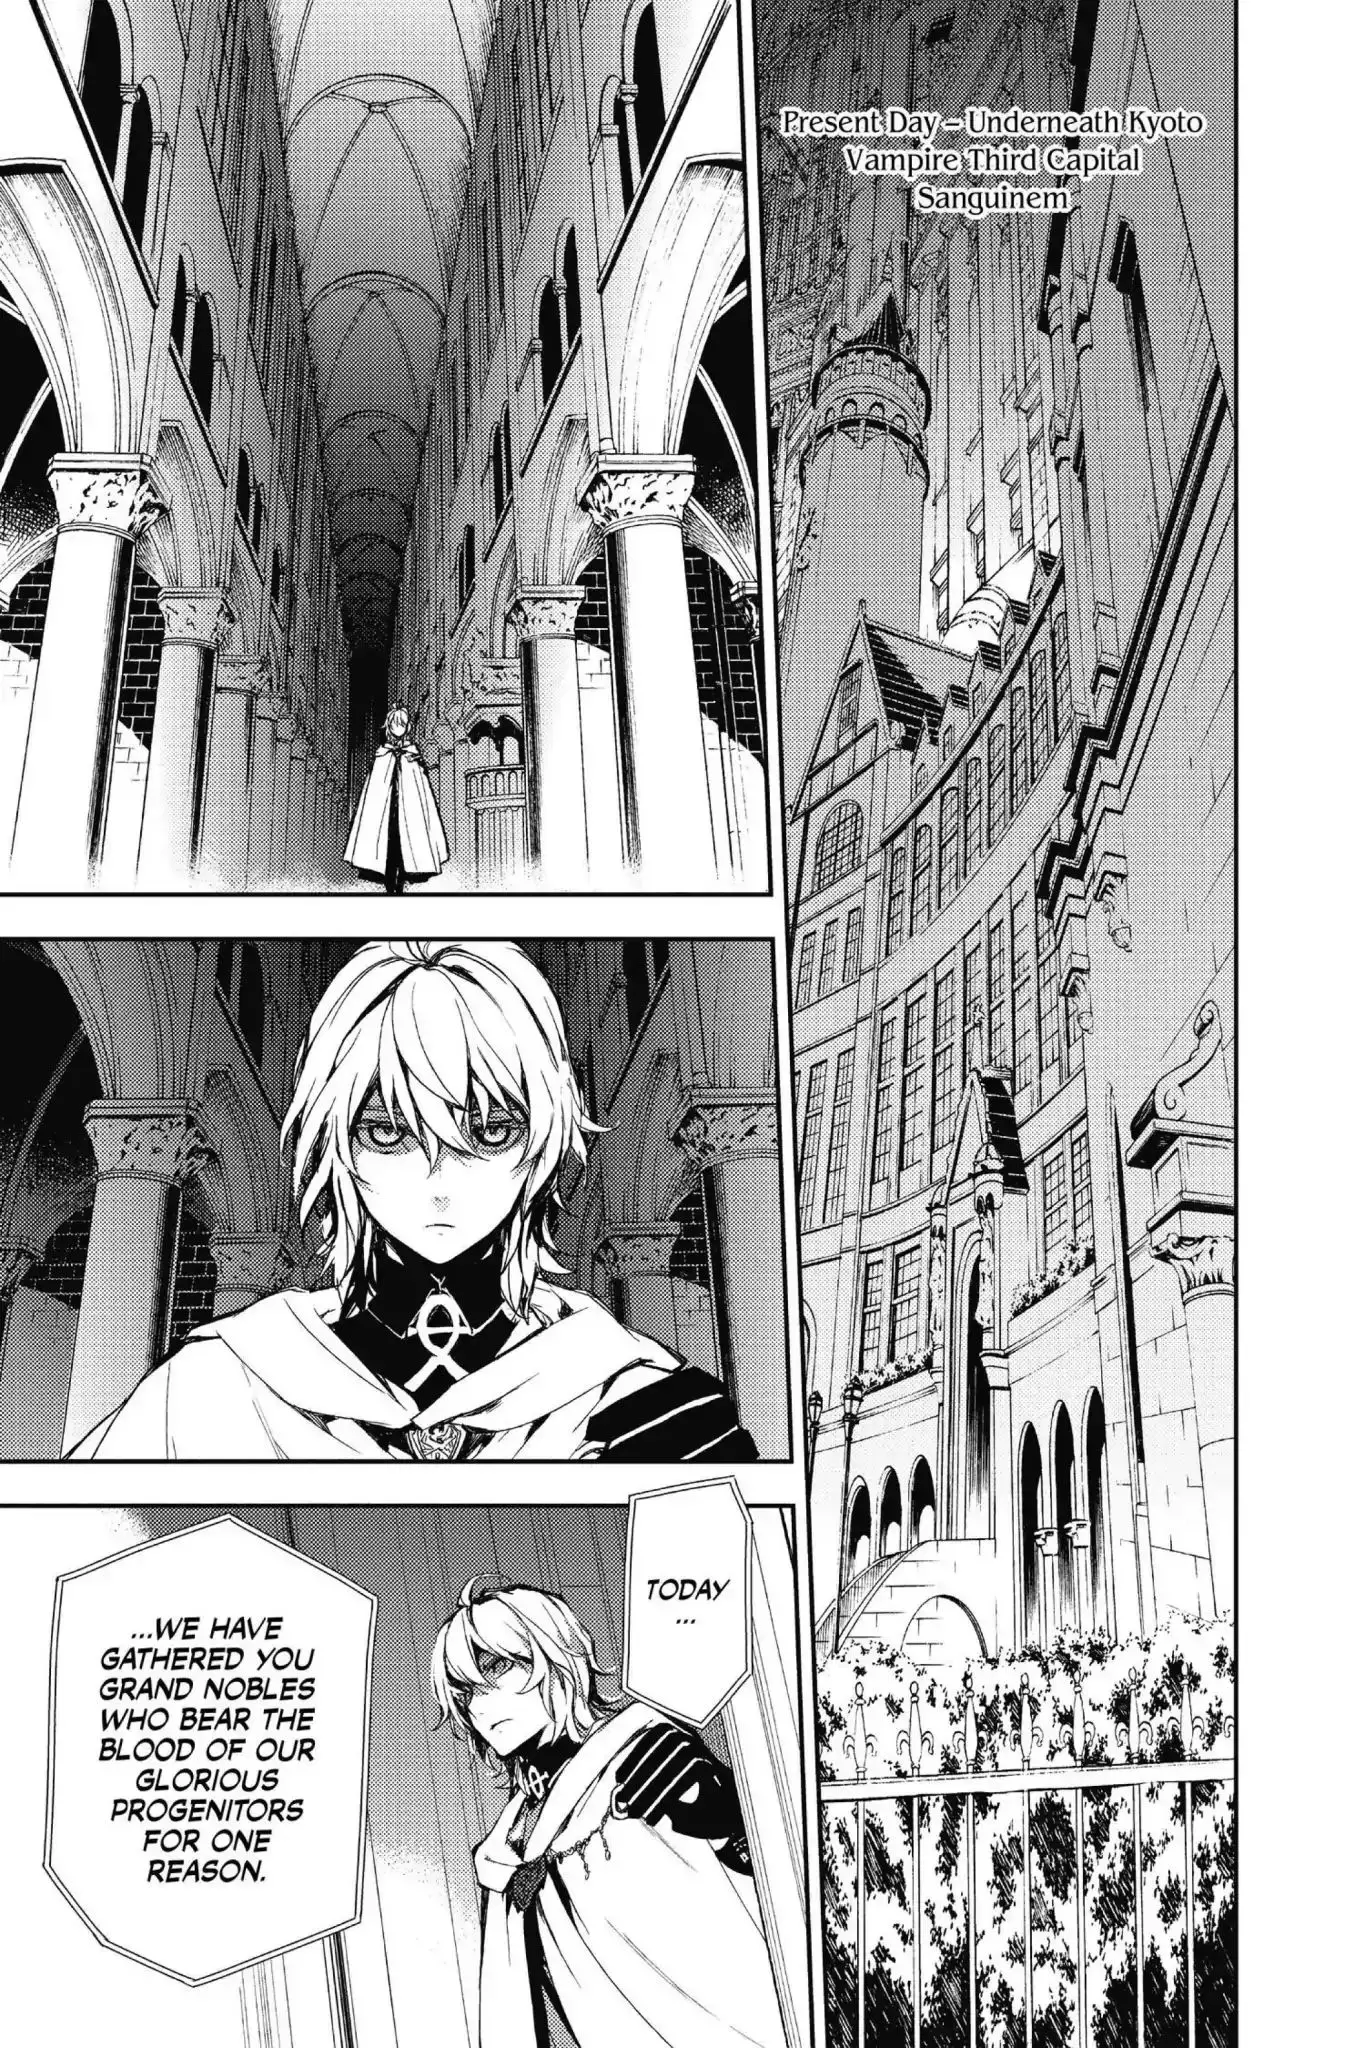 Seraph Of The End - 5 page 28-7416eea1